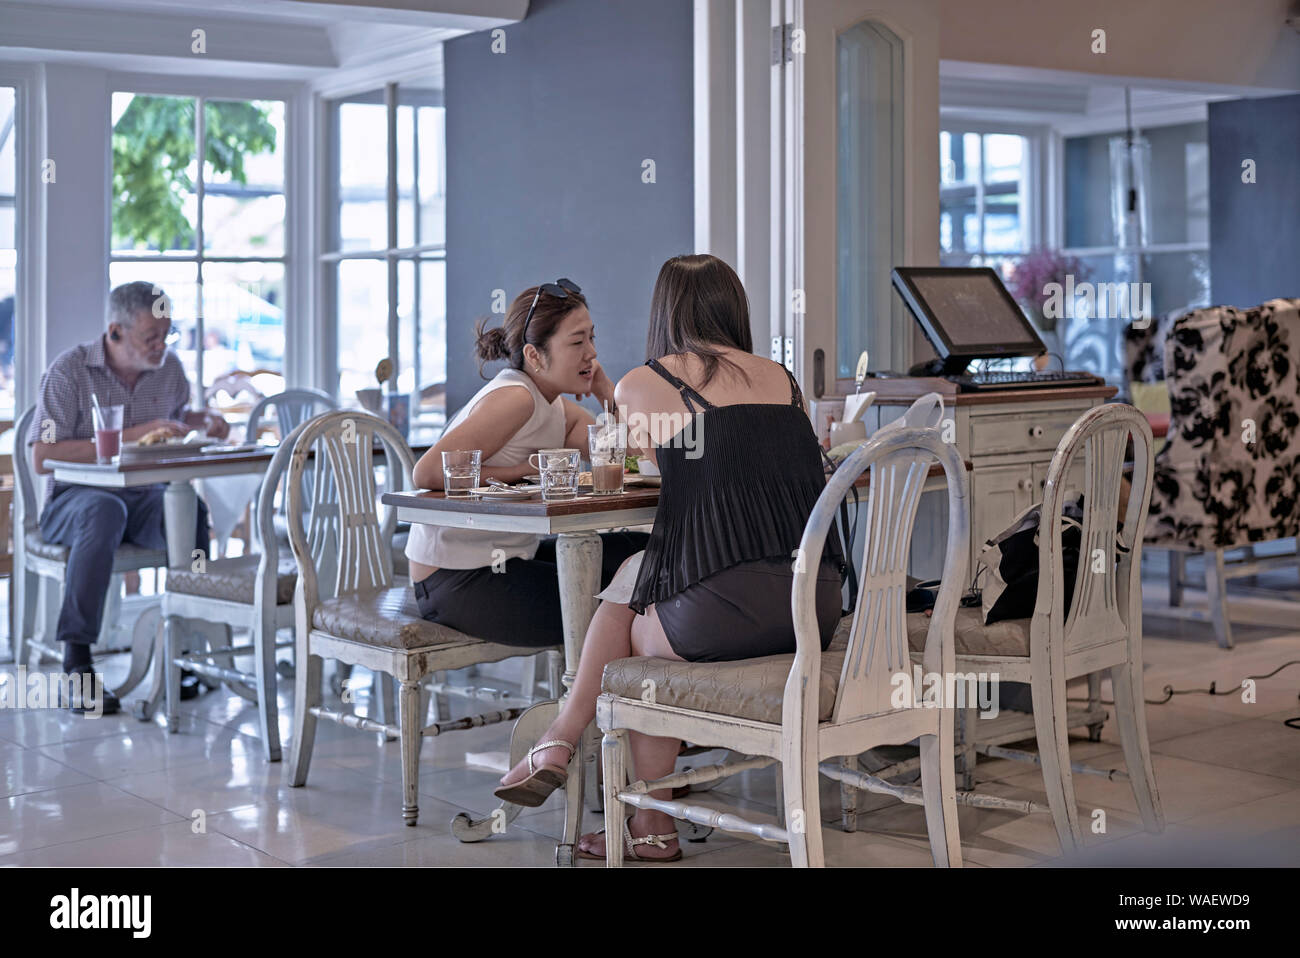 Two Women talking and passing the time of day chatting in a restaurant. Thailand Southeast Asia Stock Photo